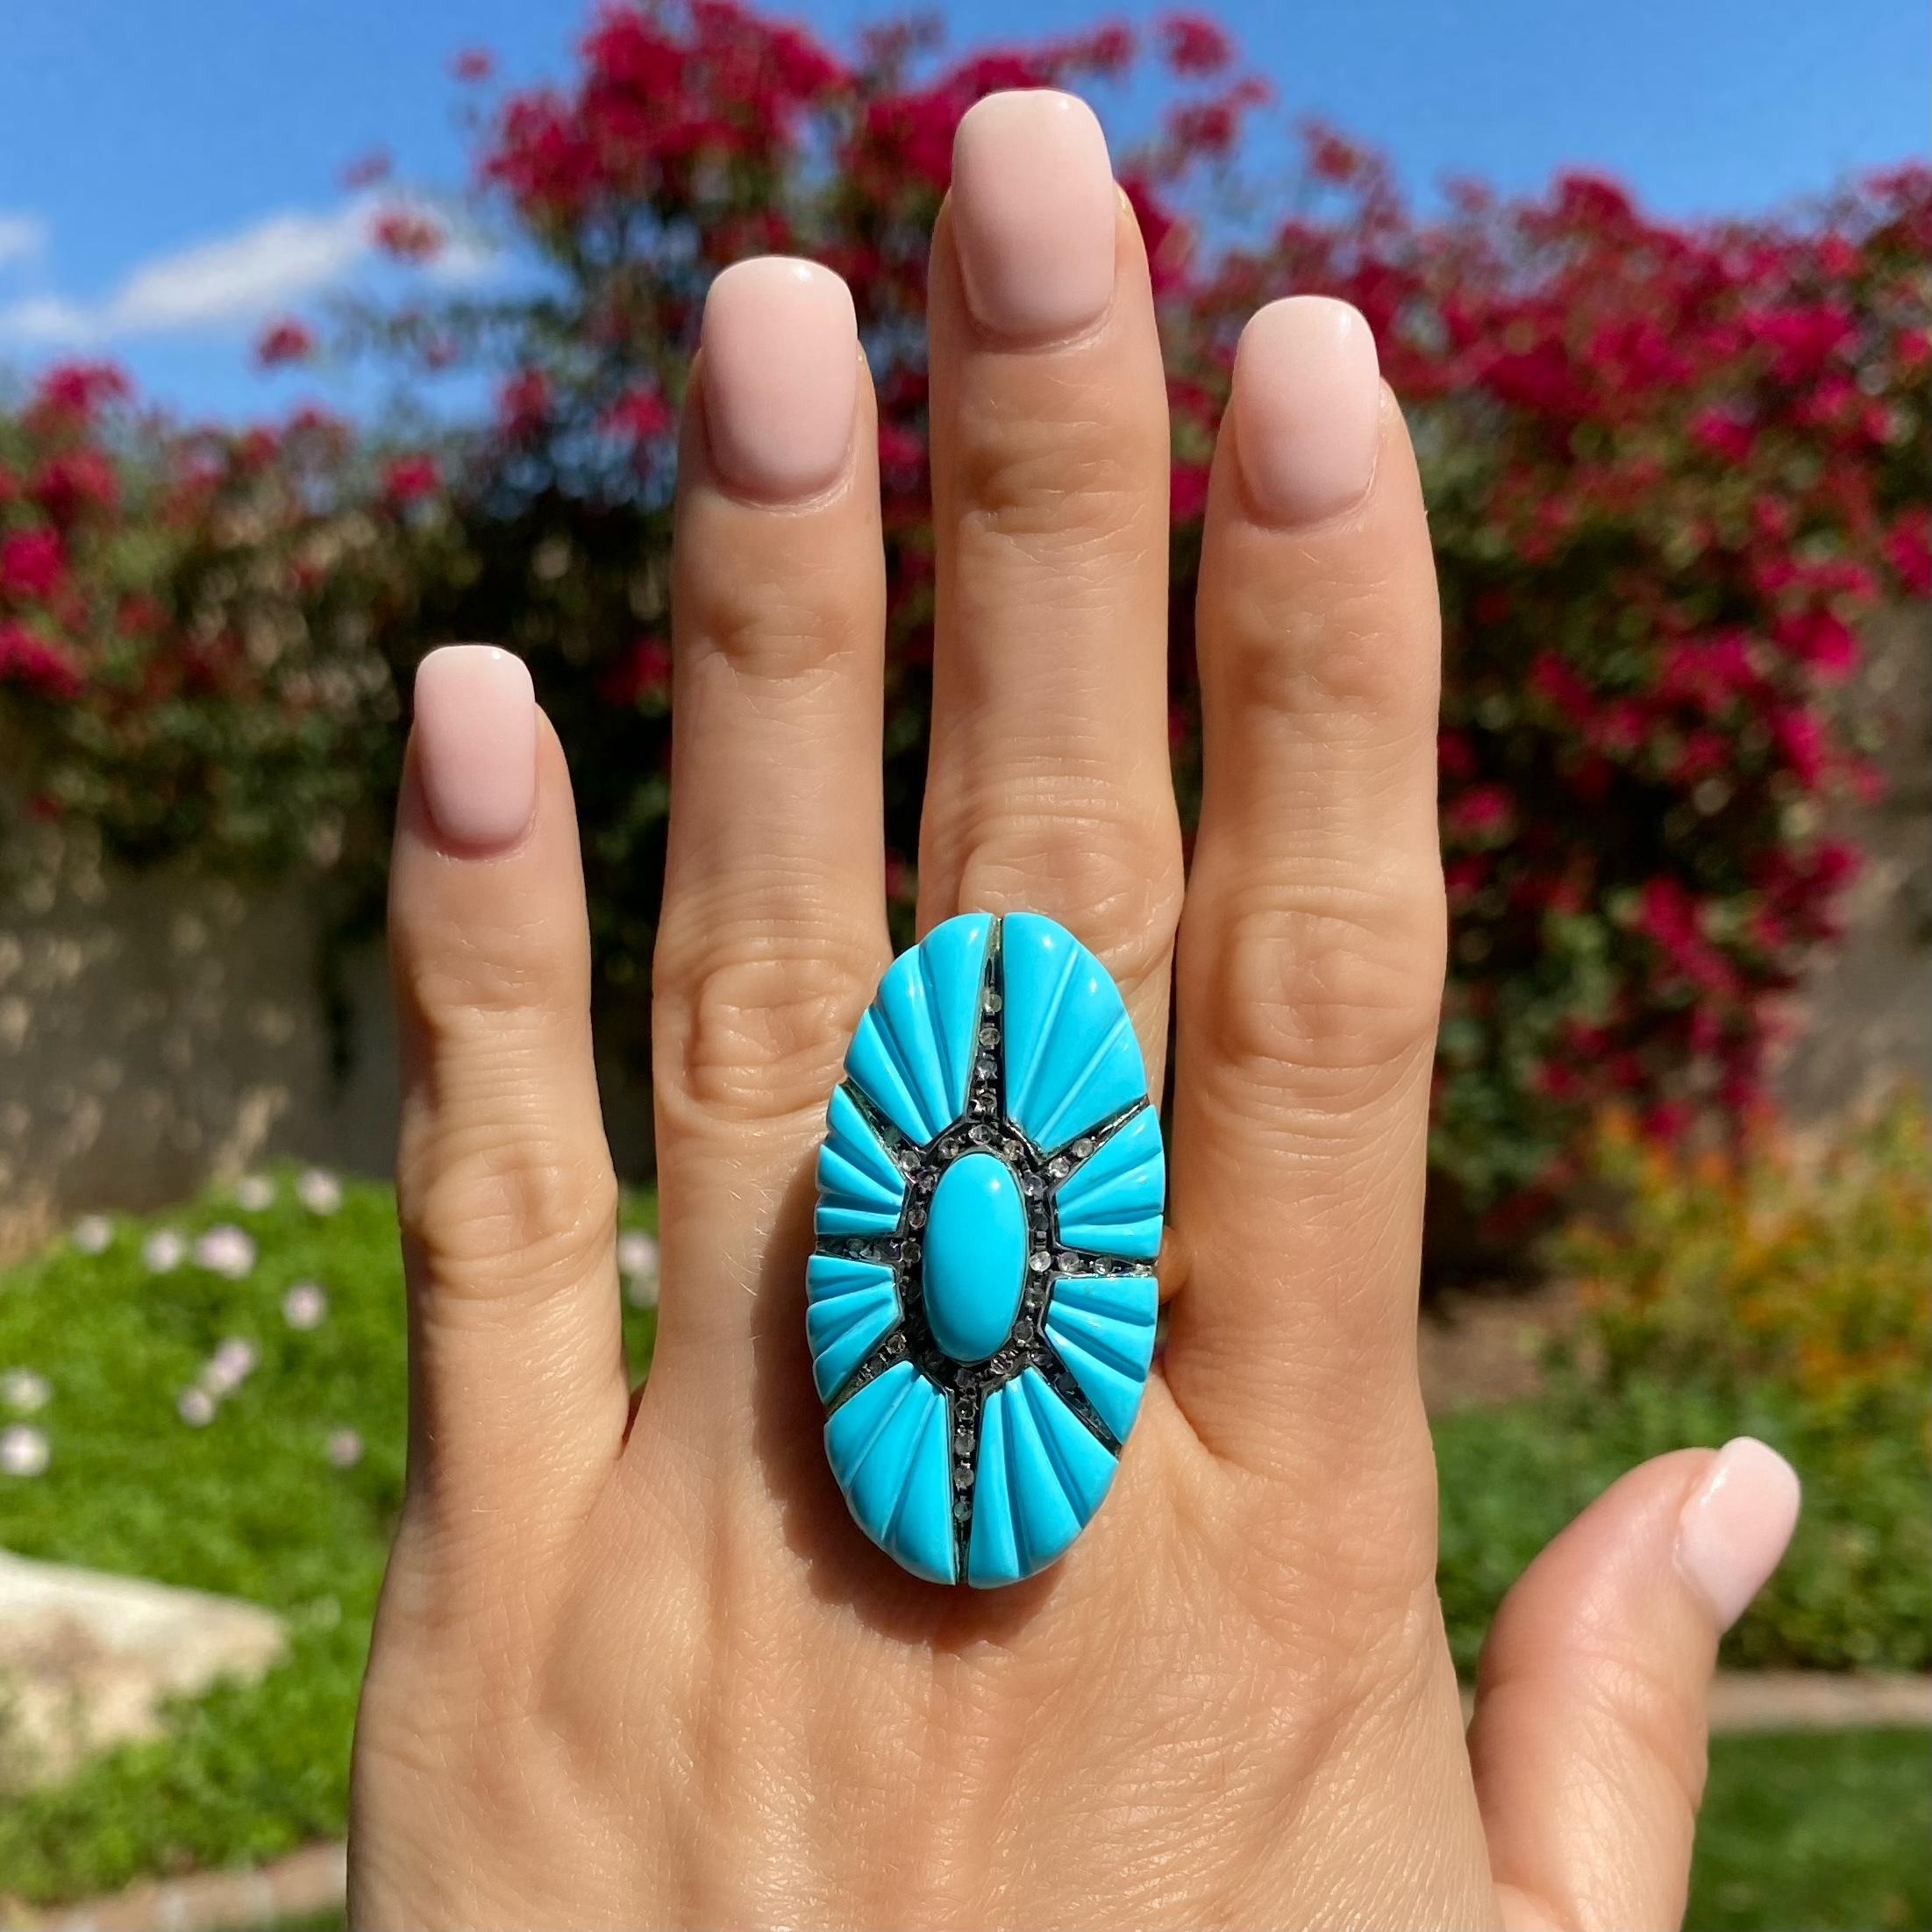 Fabulous Large Statement Ring featuring a Hand carved Oval Turquoise centering an eight ray star extending out with 35 Rose cut Diamonds, weighing approx. 0.25tcw, creating 8 Hand carved Turquoise sections outside the star making this a beautiful